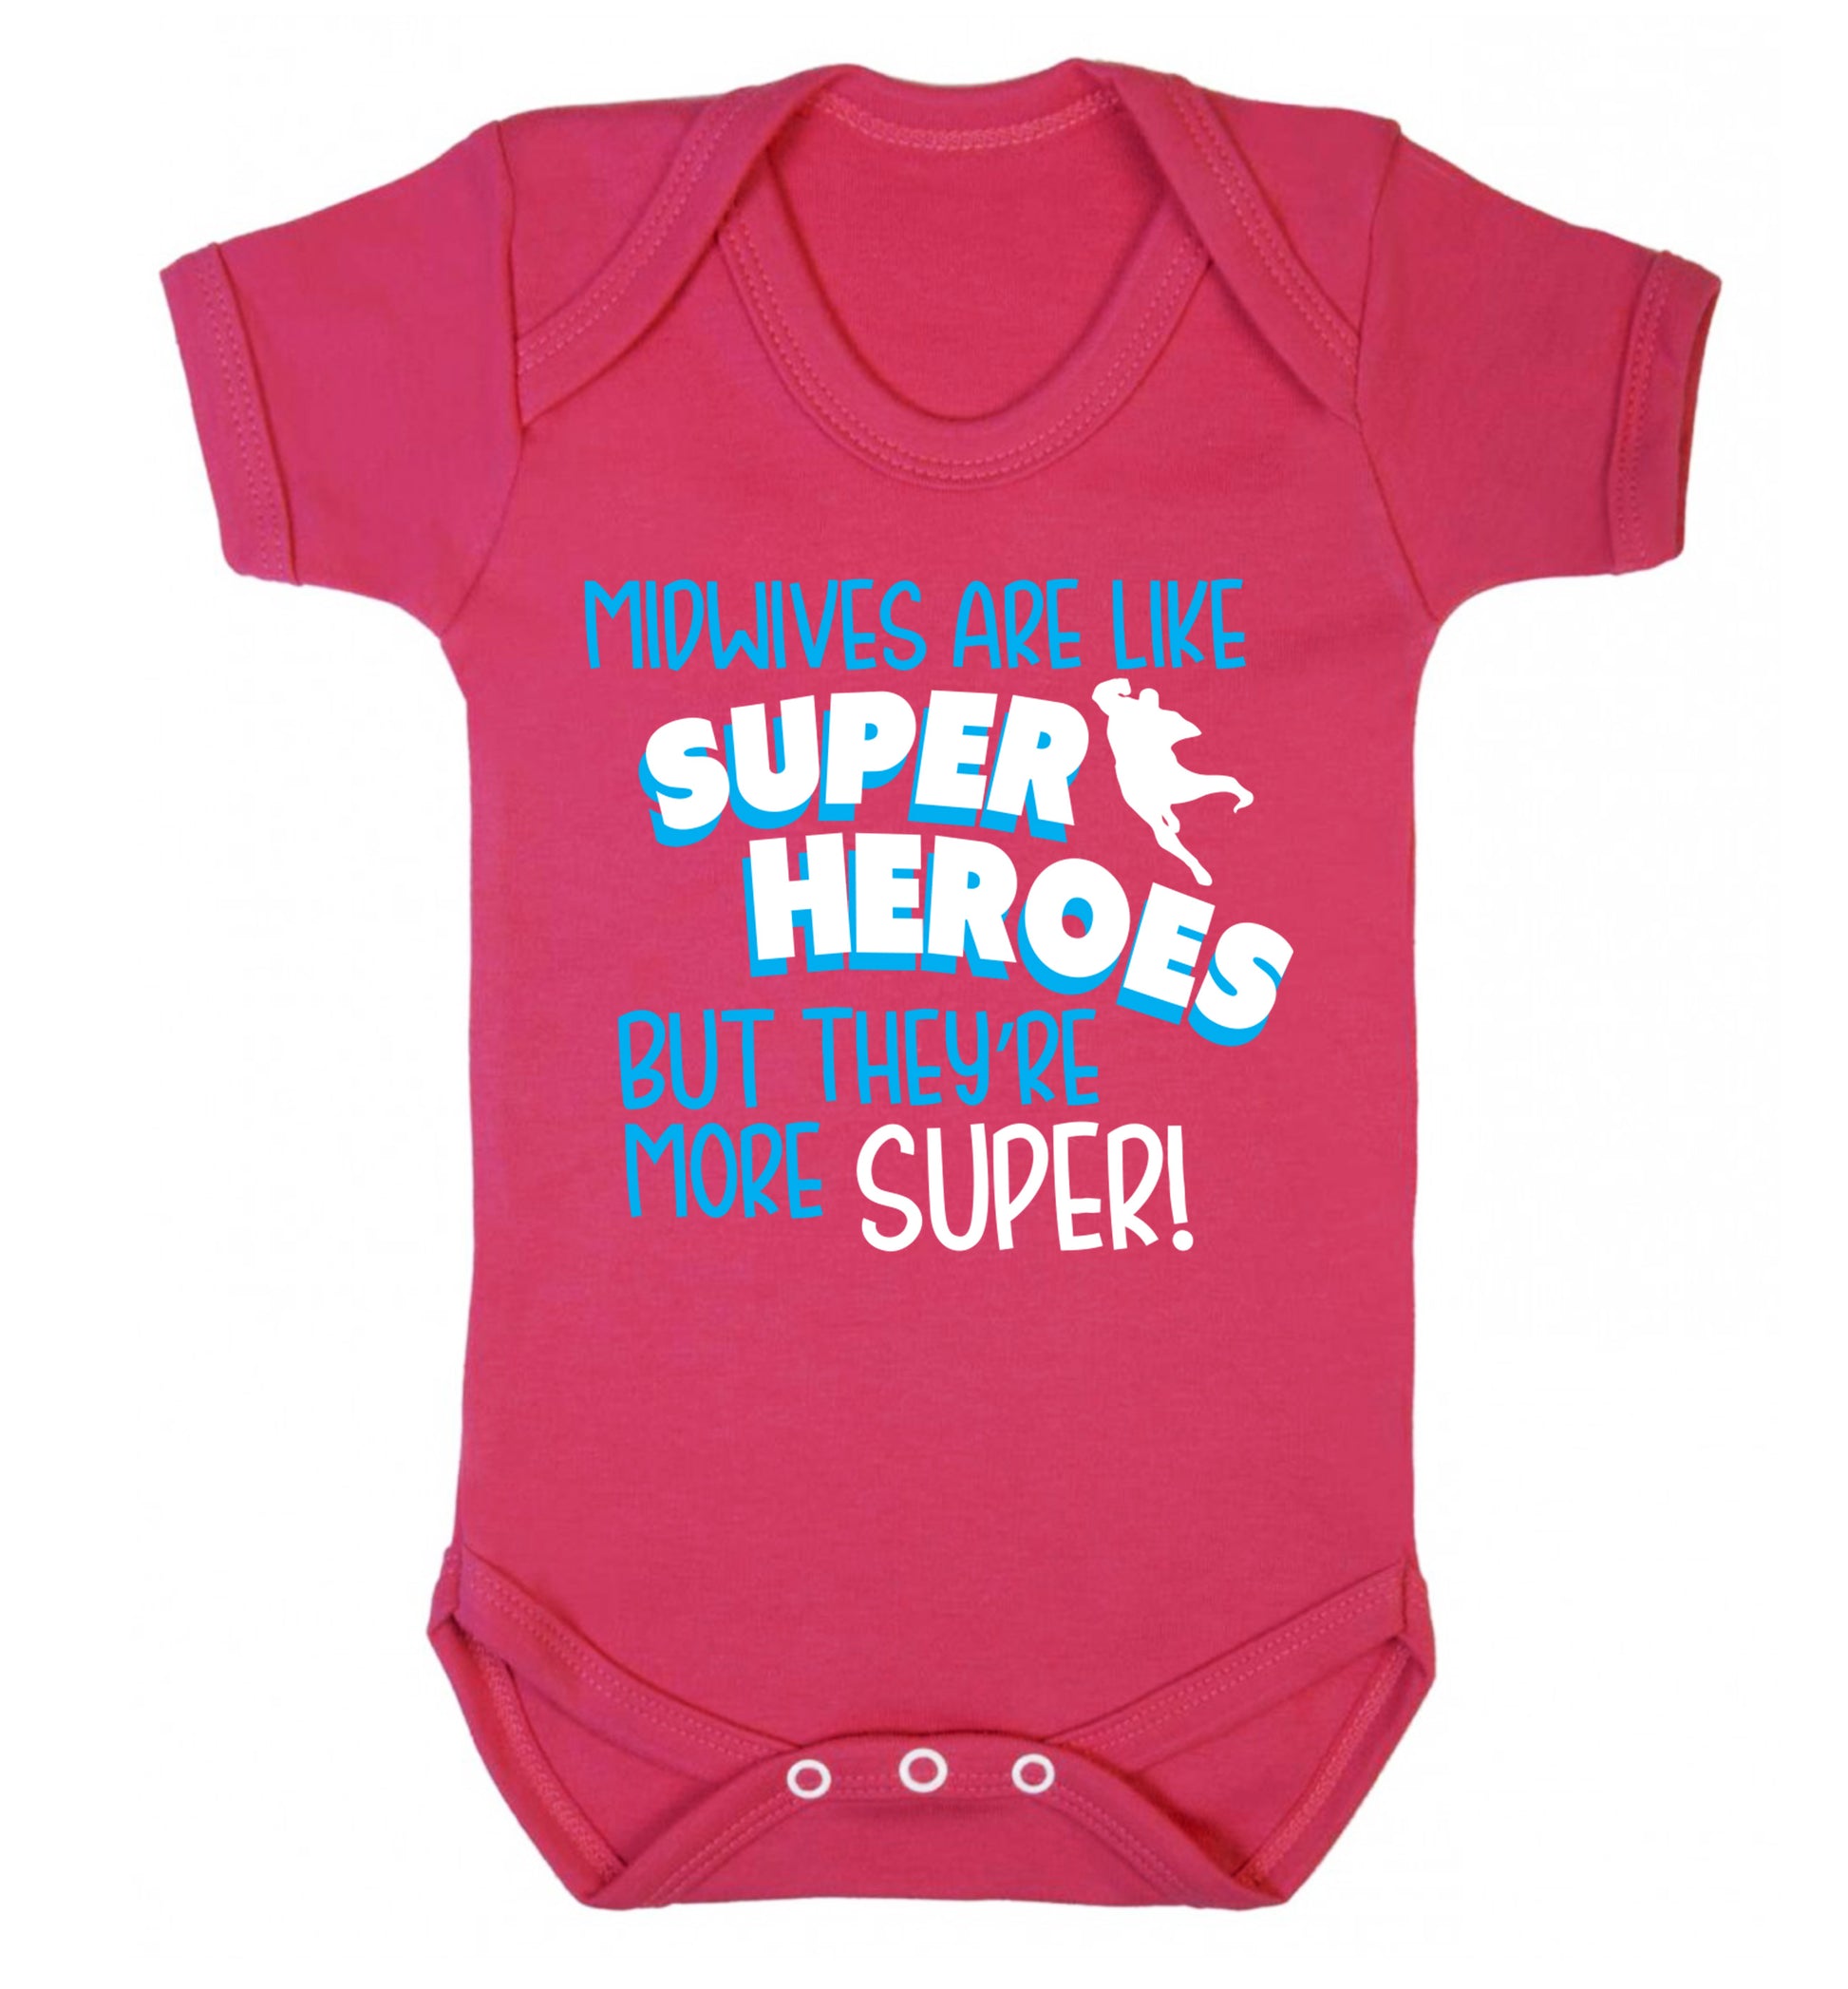 Midwives are like superheros but they're more super Baby Vest dark pink 18-24 months